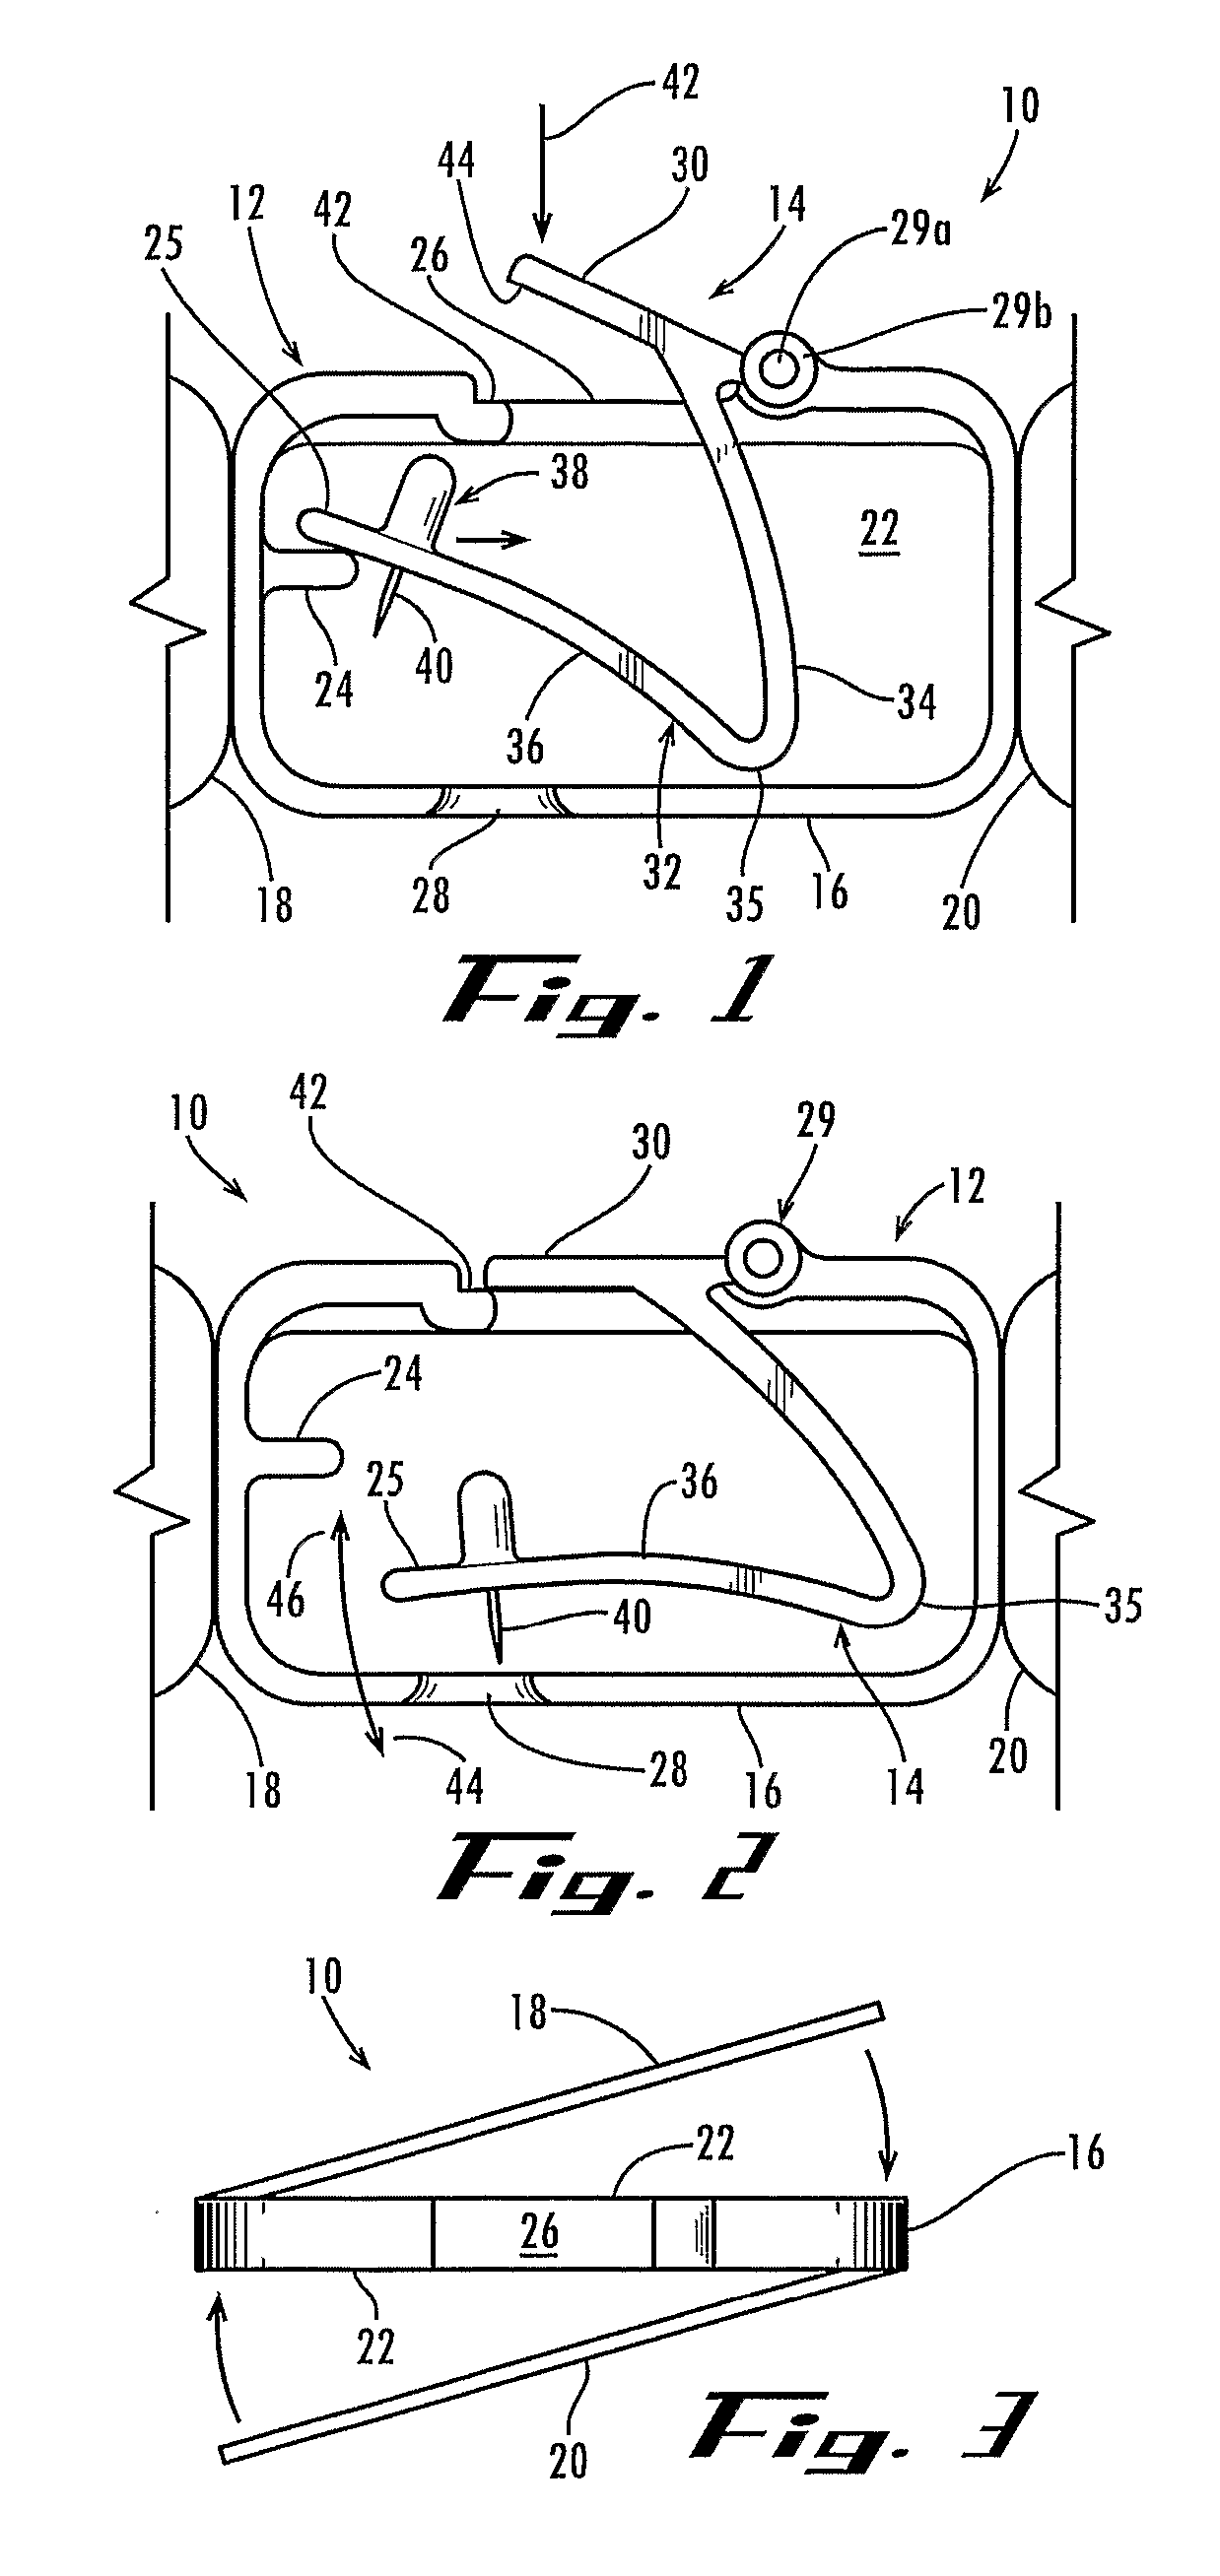 Low-Cost Lancing Device with Cantilevered Leaf Spring for Launch and Return